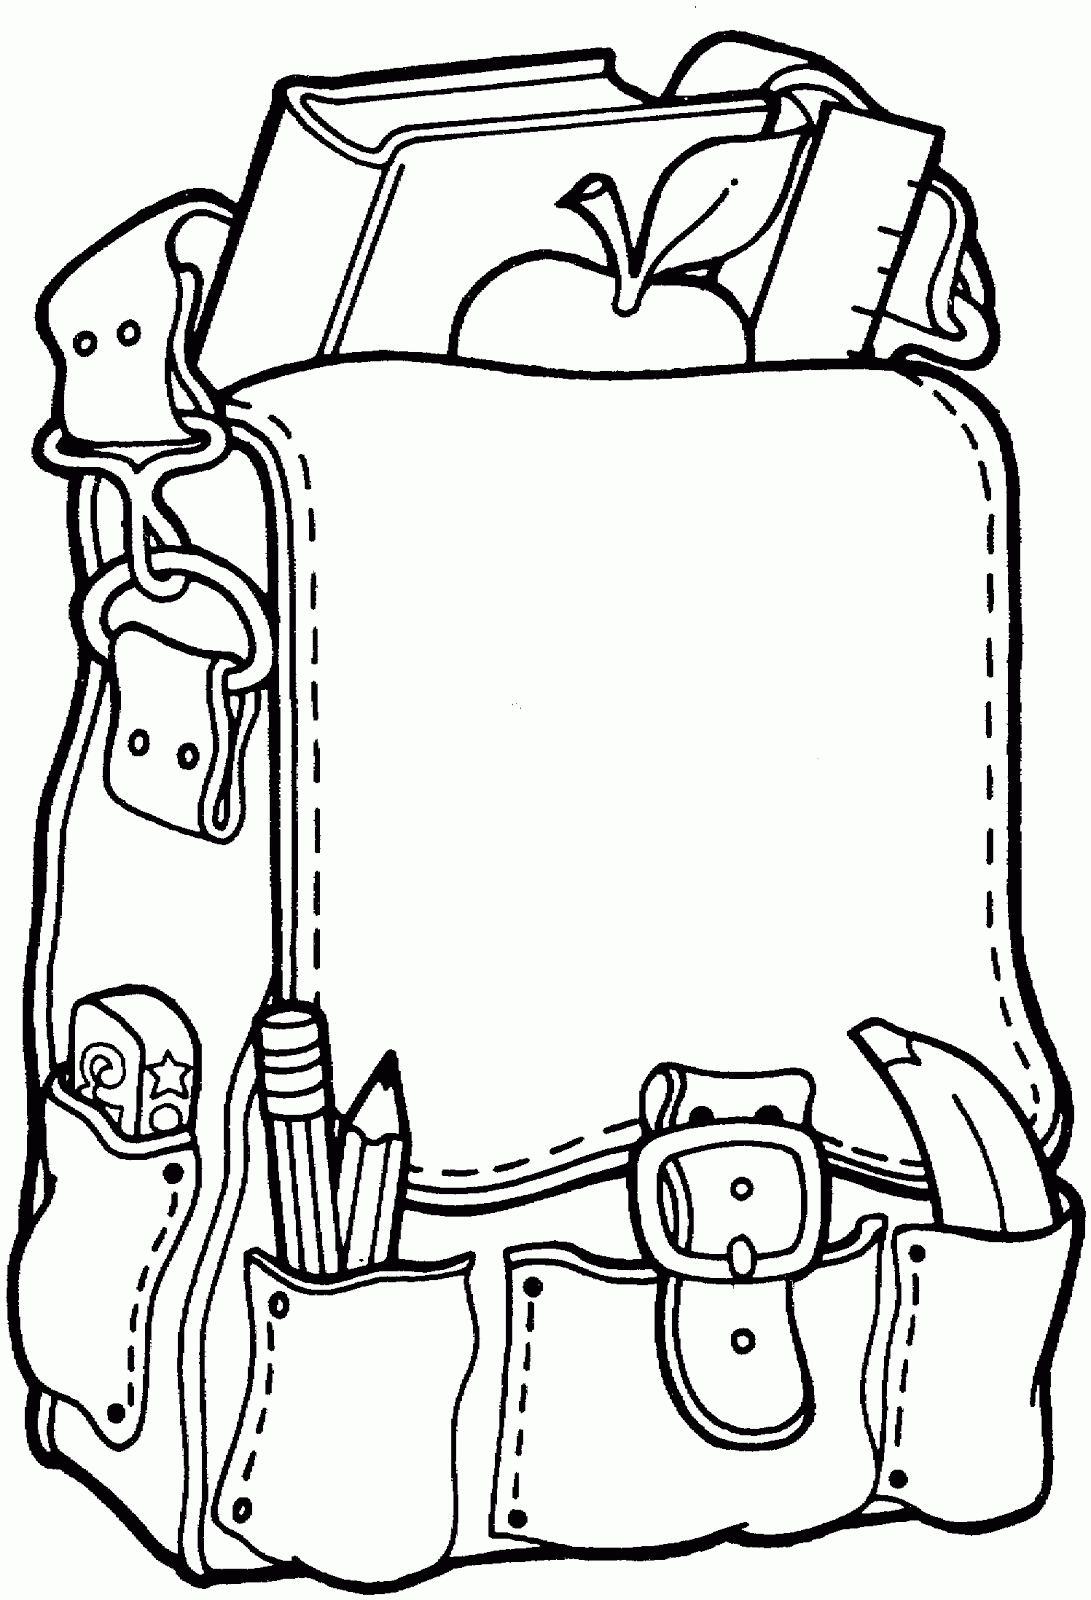 back-to-school-coloring-pages-2011-kentscraft